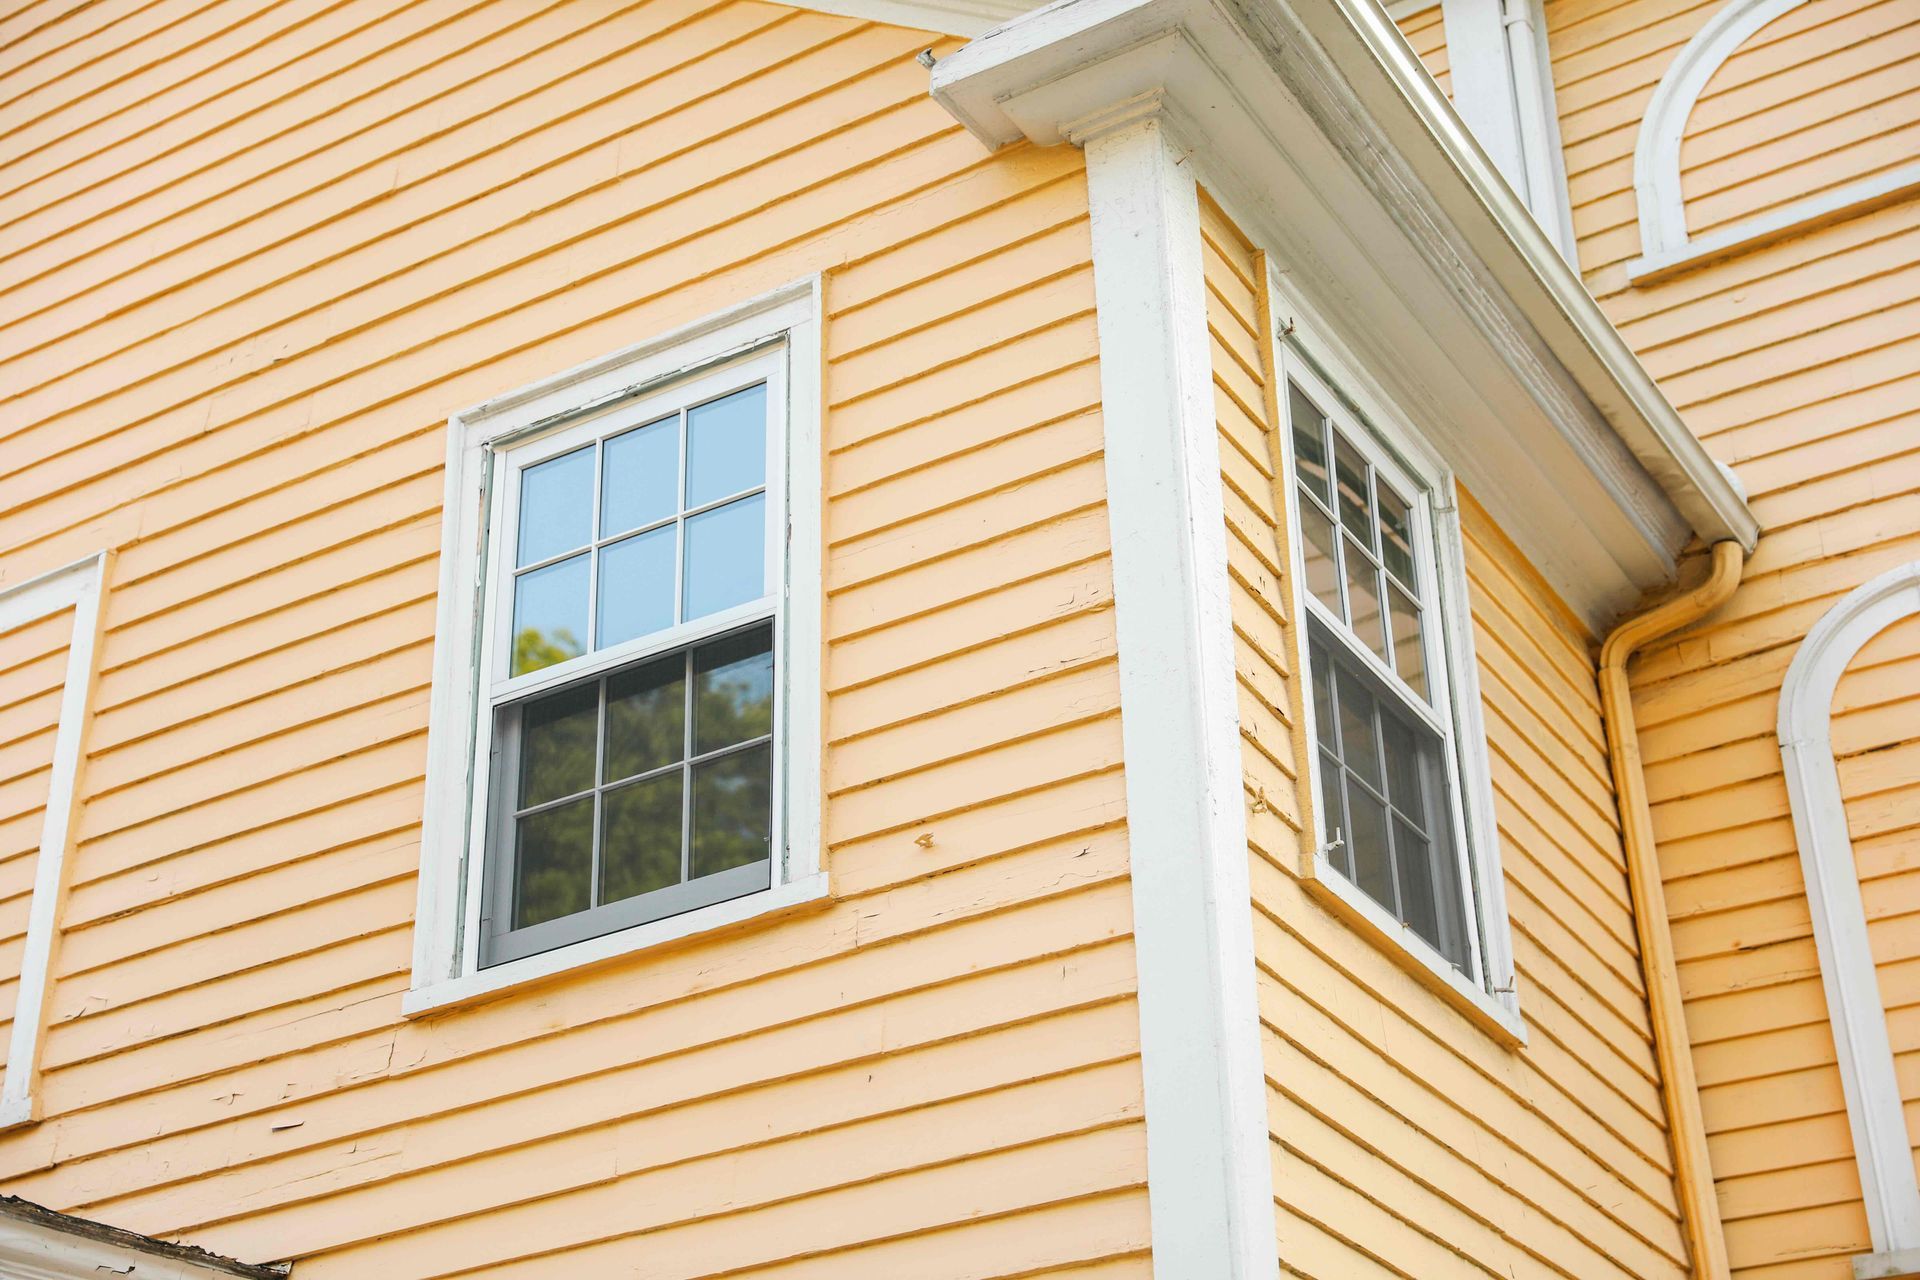 a close up of a yellow house with white trim and windows .